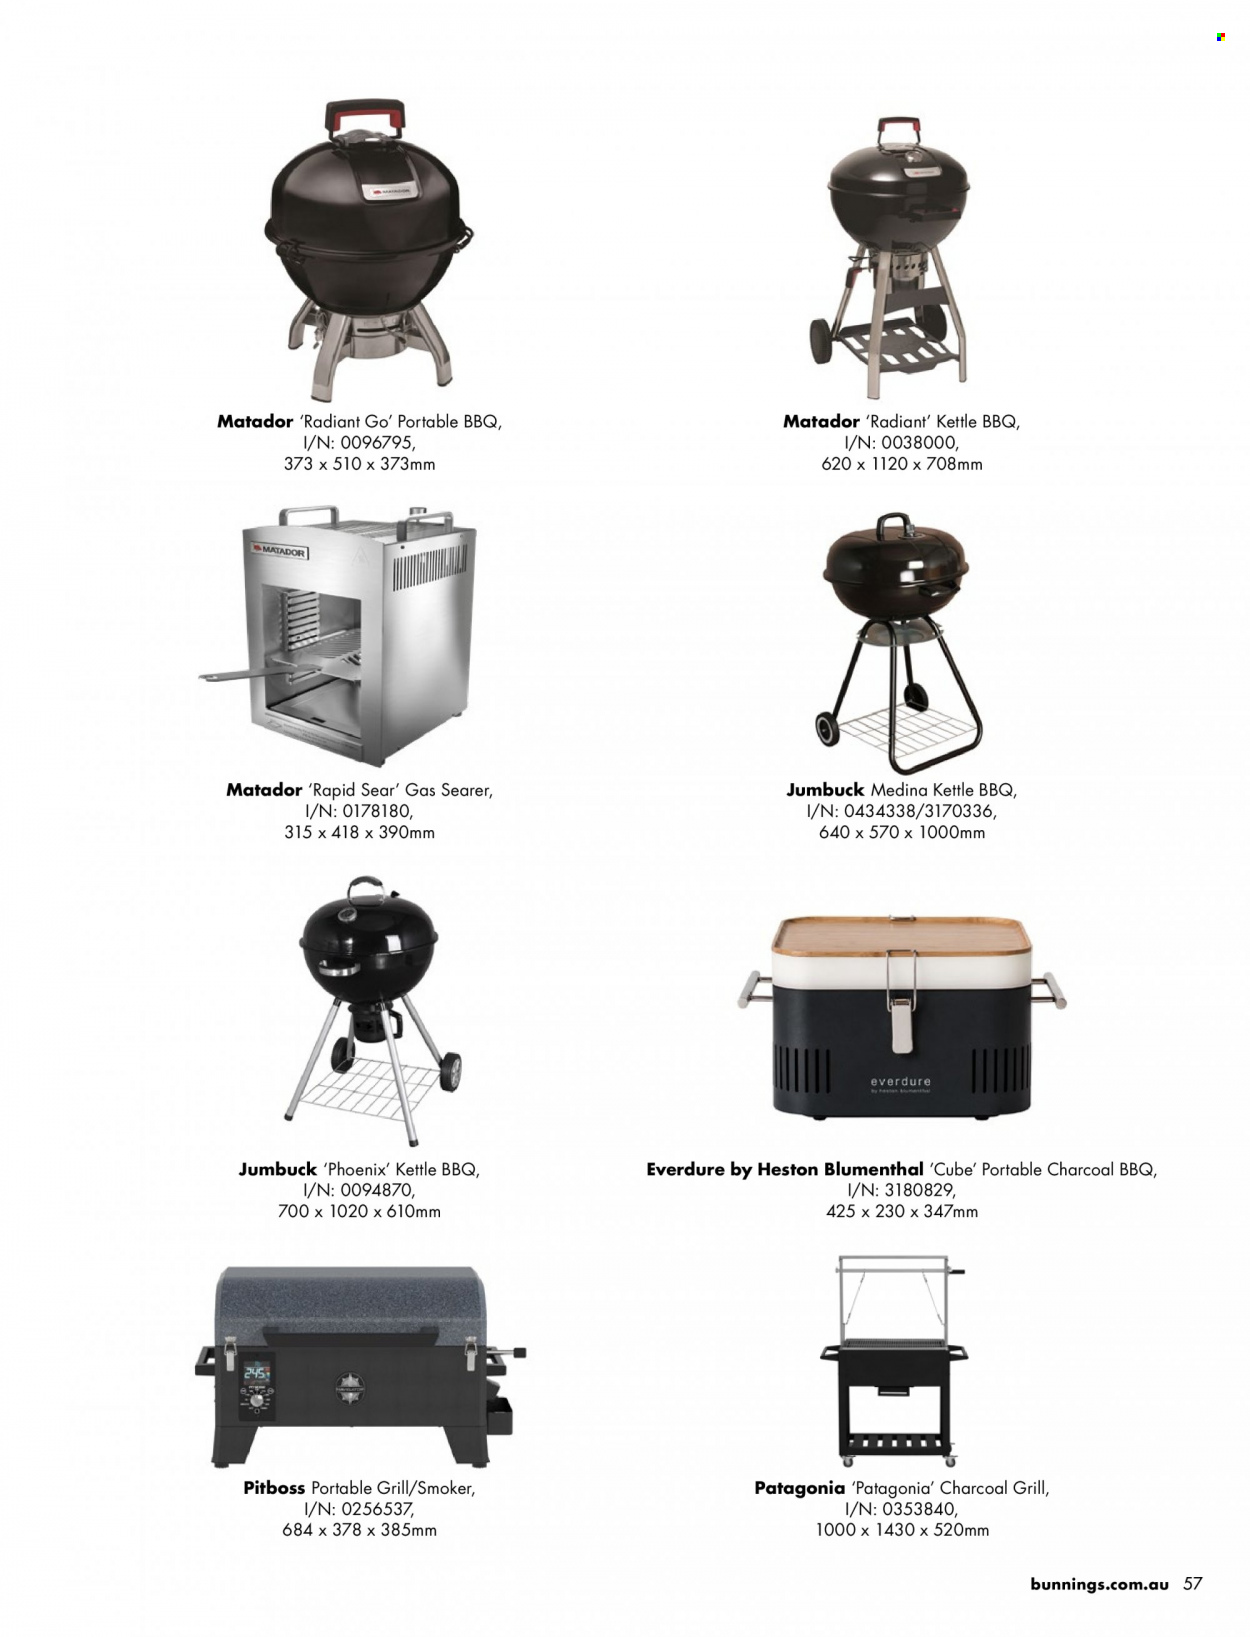 thumbnail - Bunnings Warehouse Catalogue - Sales products - grill, smoker, portable barbecue, charcoal grill. Page 57.